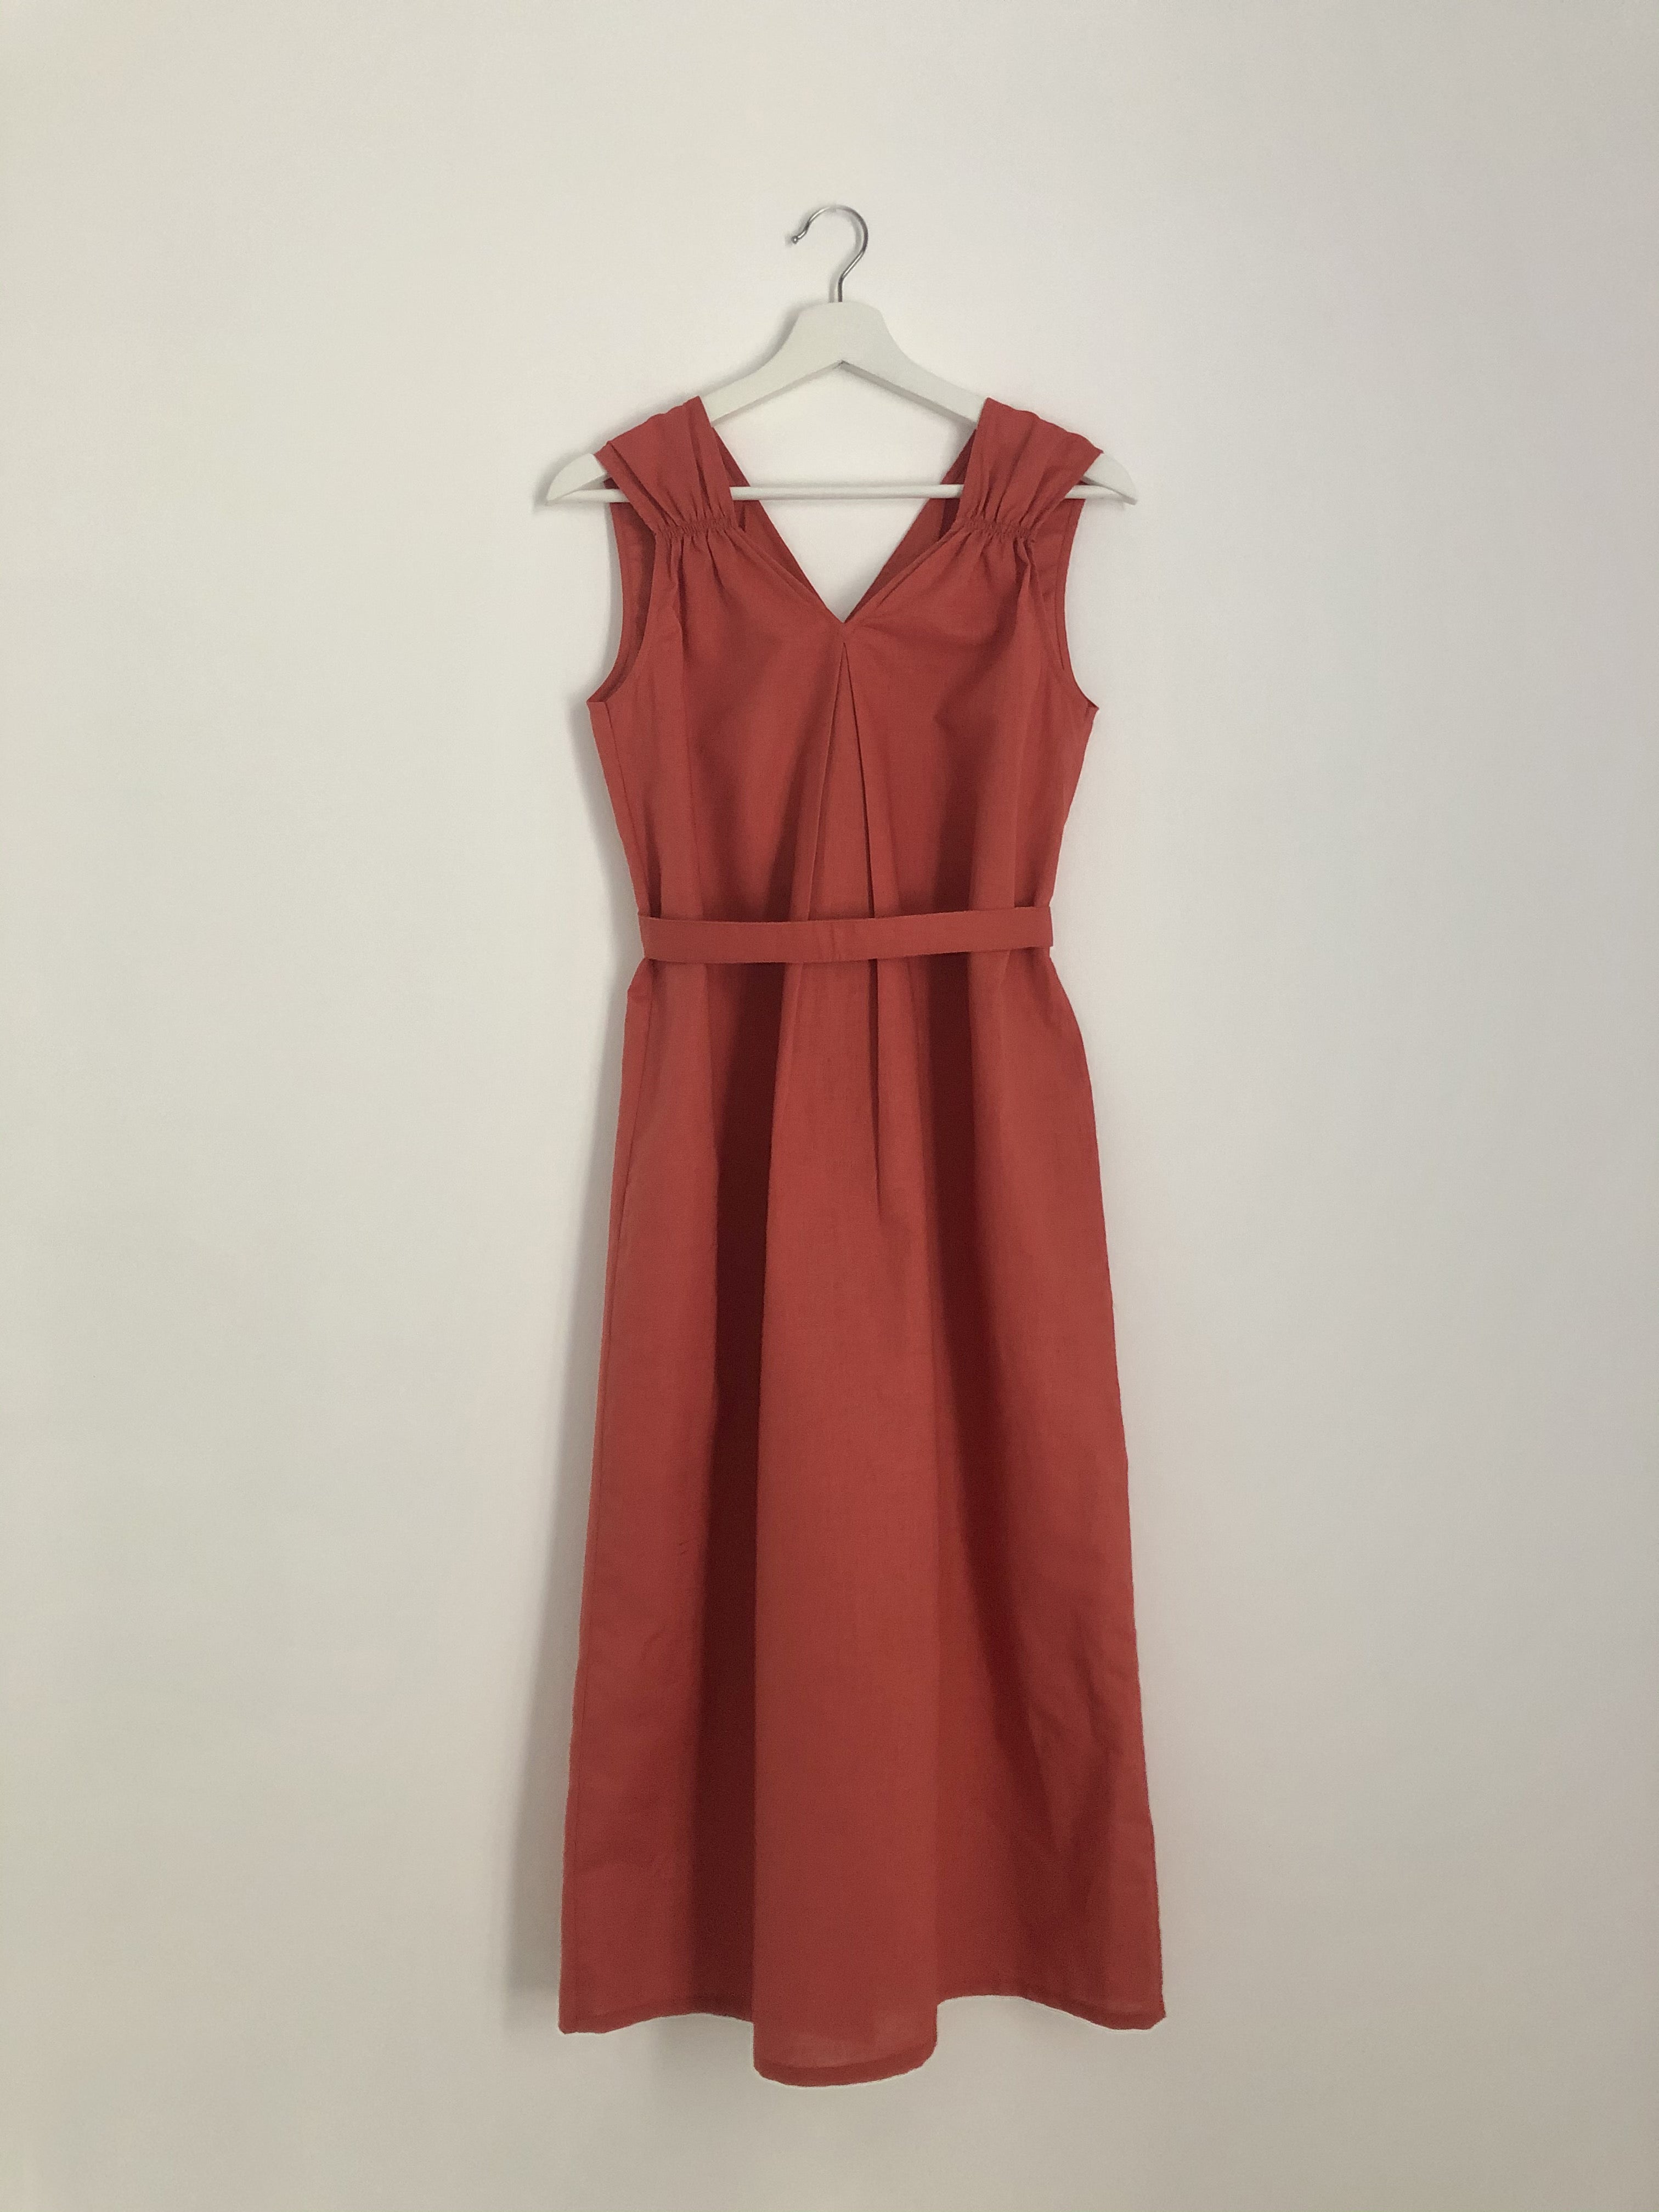 TWO-WAY VEST DRESS in coral